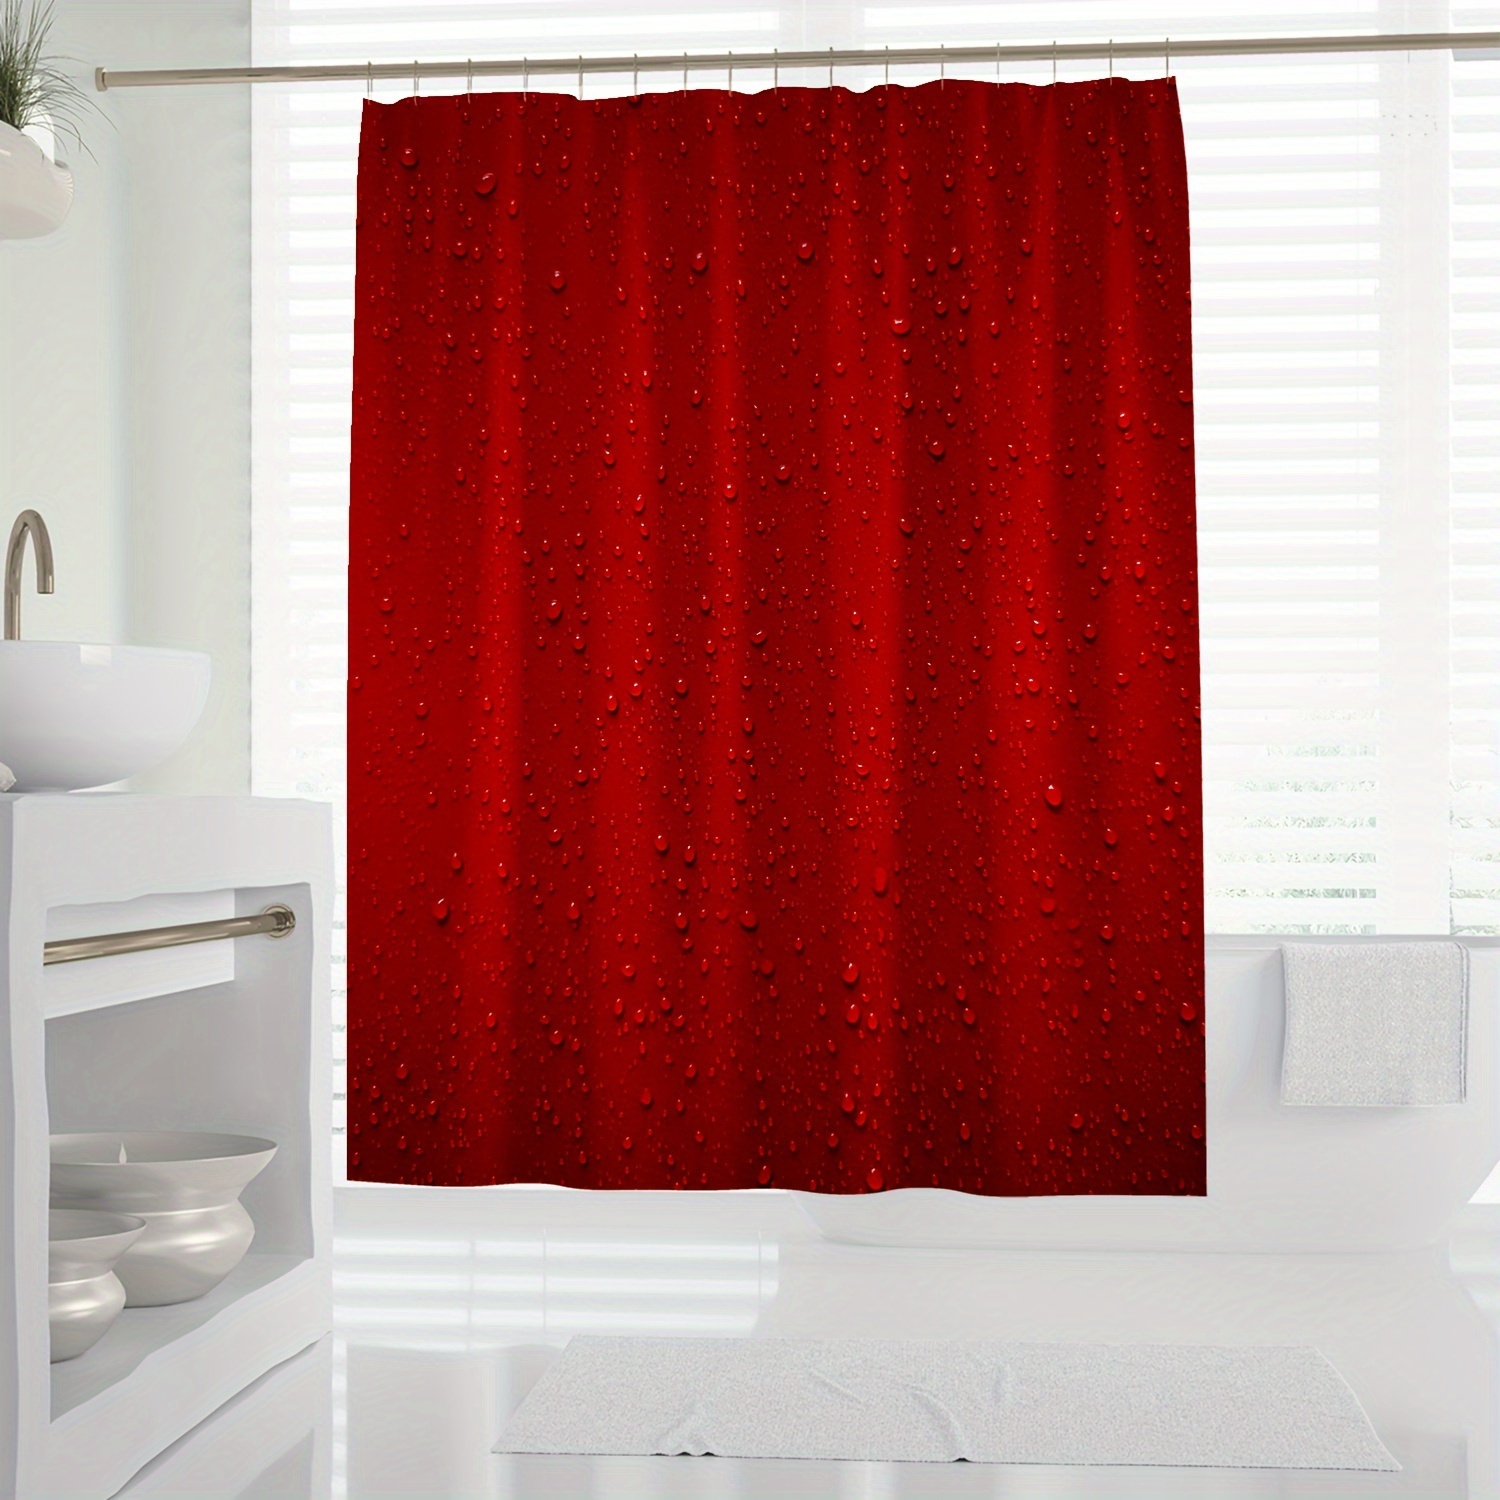 

1pc, Digital Print Shower Curtain, Water Drops Design, Red Background, Bathroom Decor, Waterproof Fabric, Home Accessory